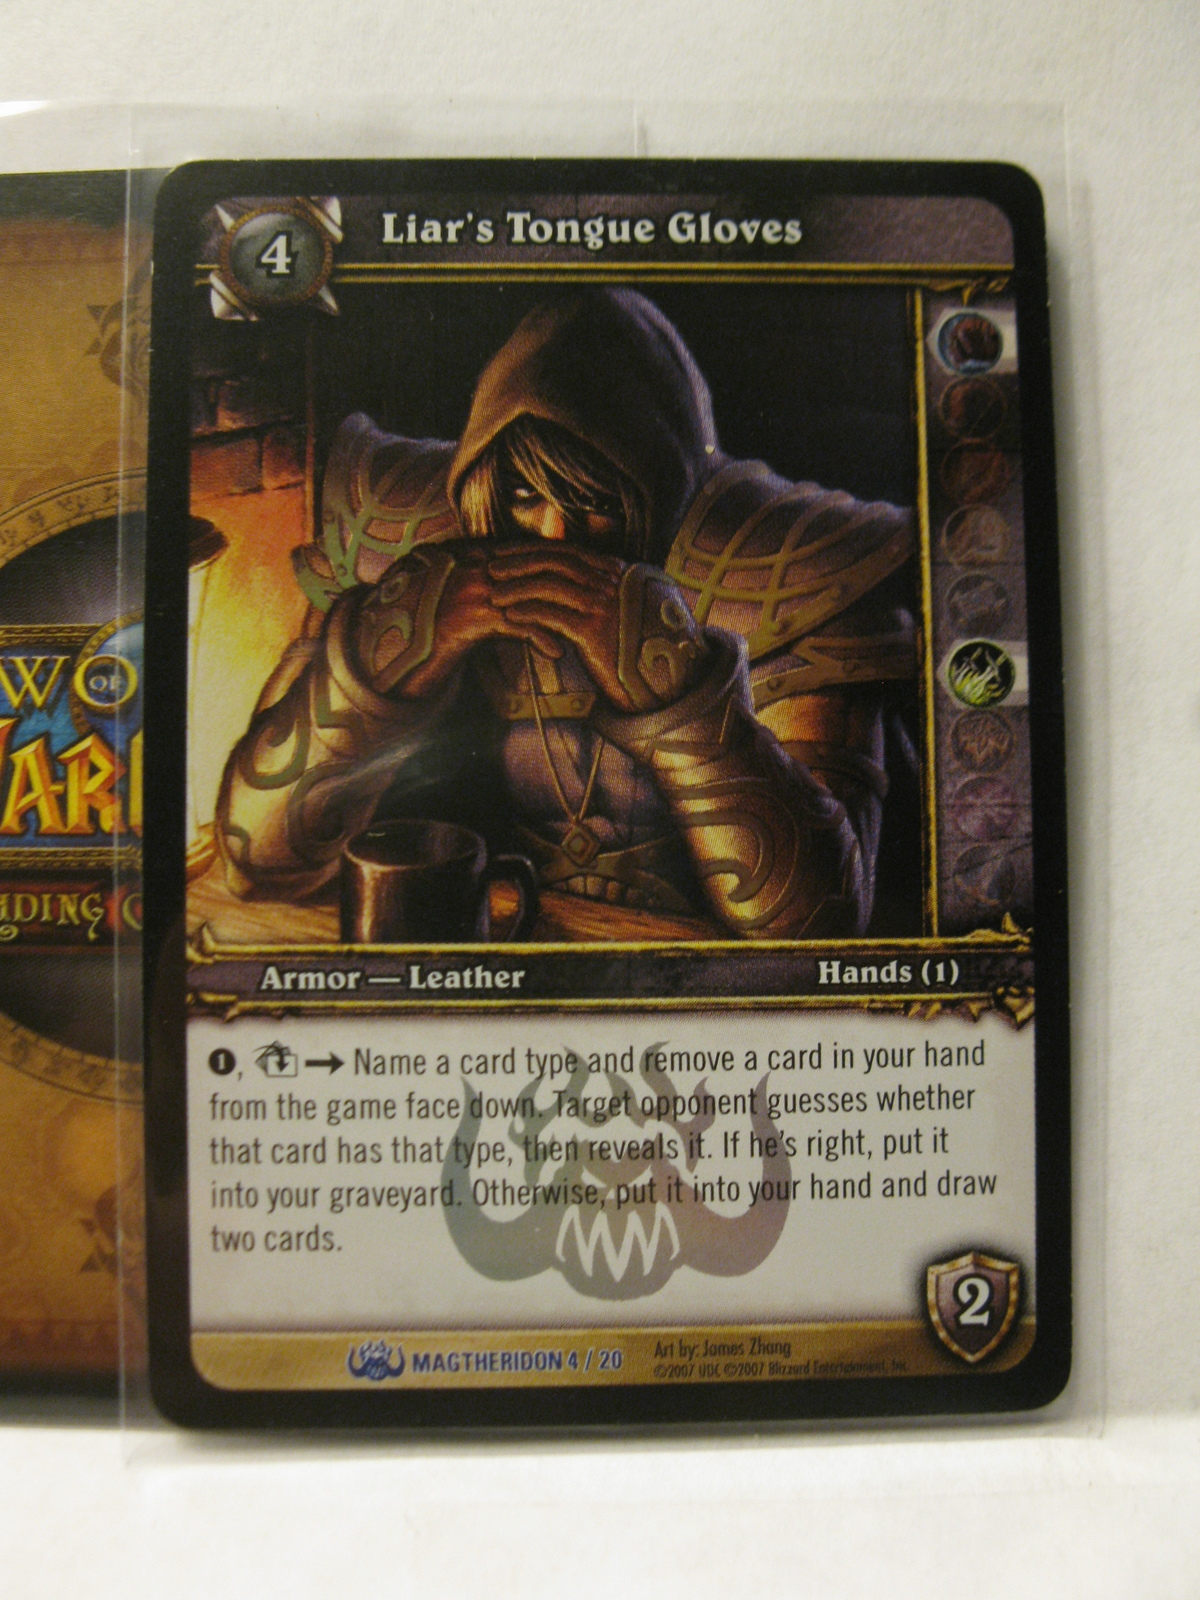 Primary image for (TC-1583) 2007 World of Warcraft Trading Card #4/20: Liar's Tongue Gloves - FOIL